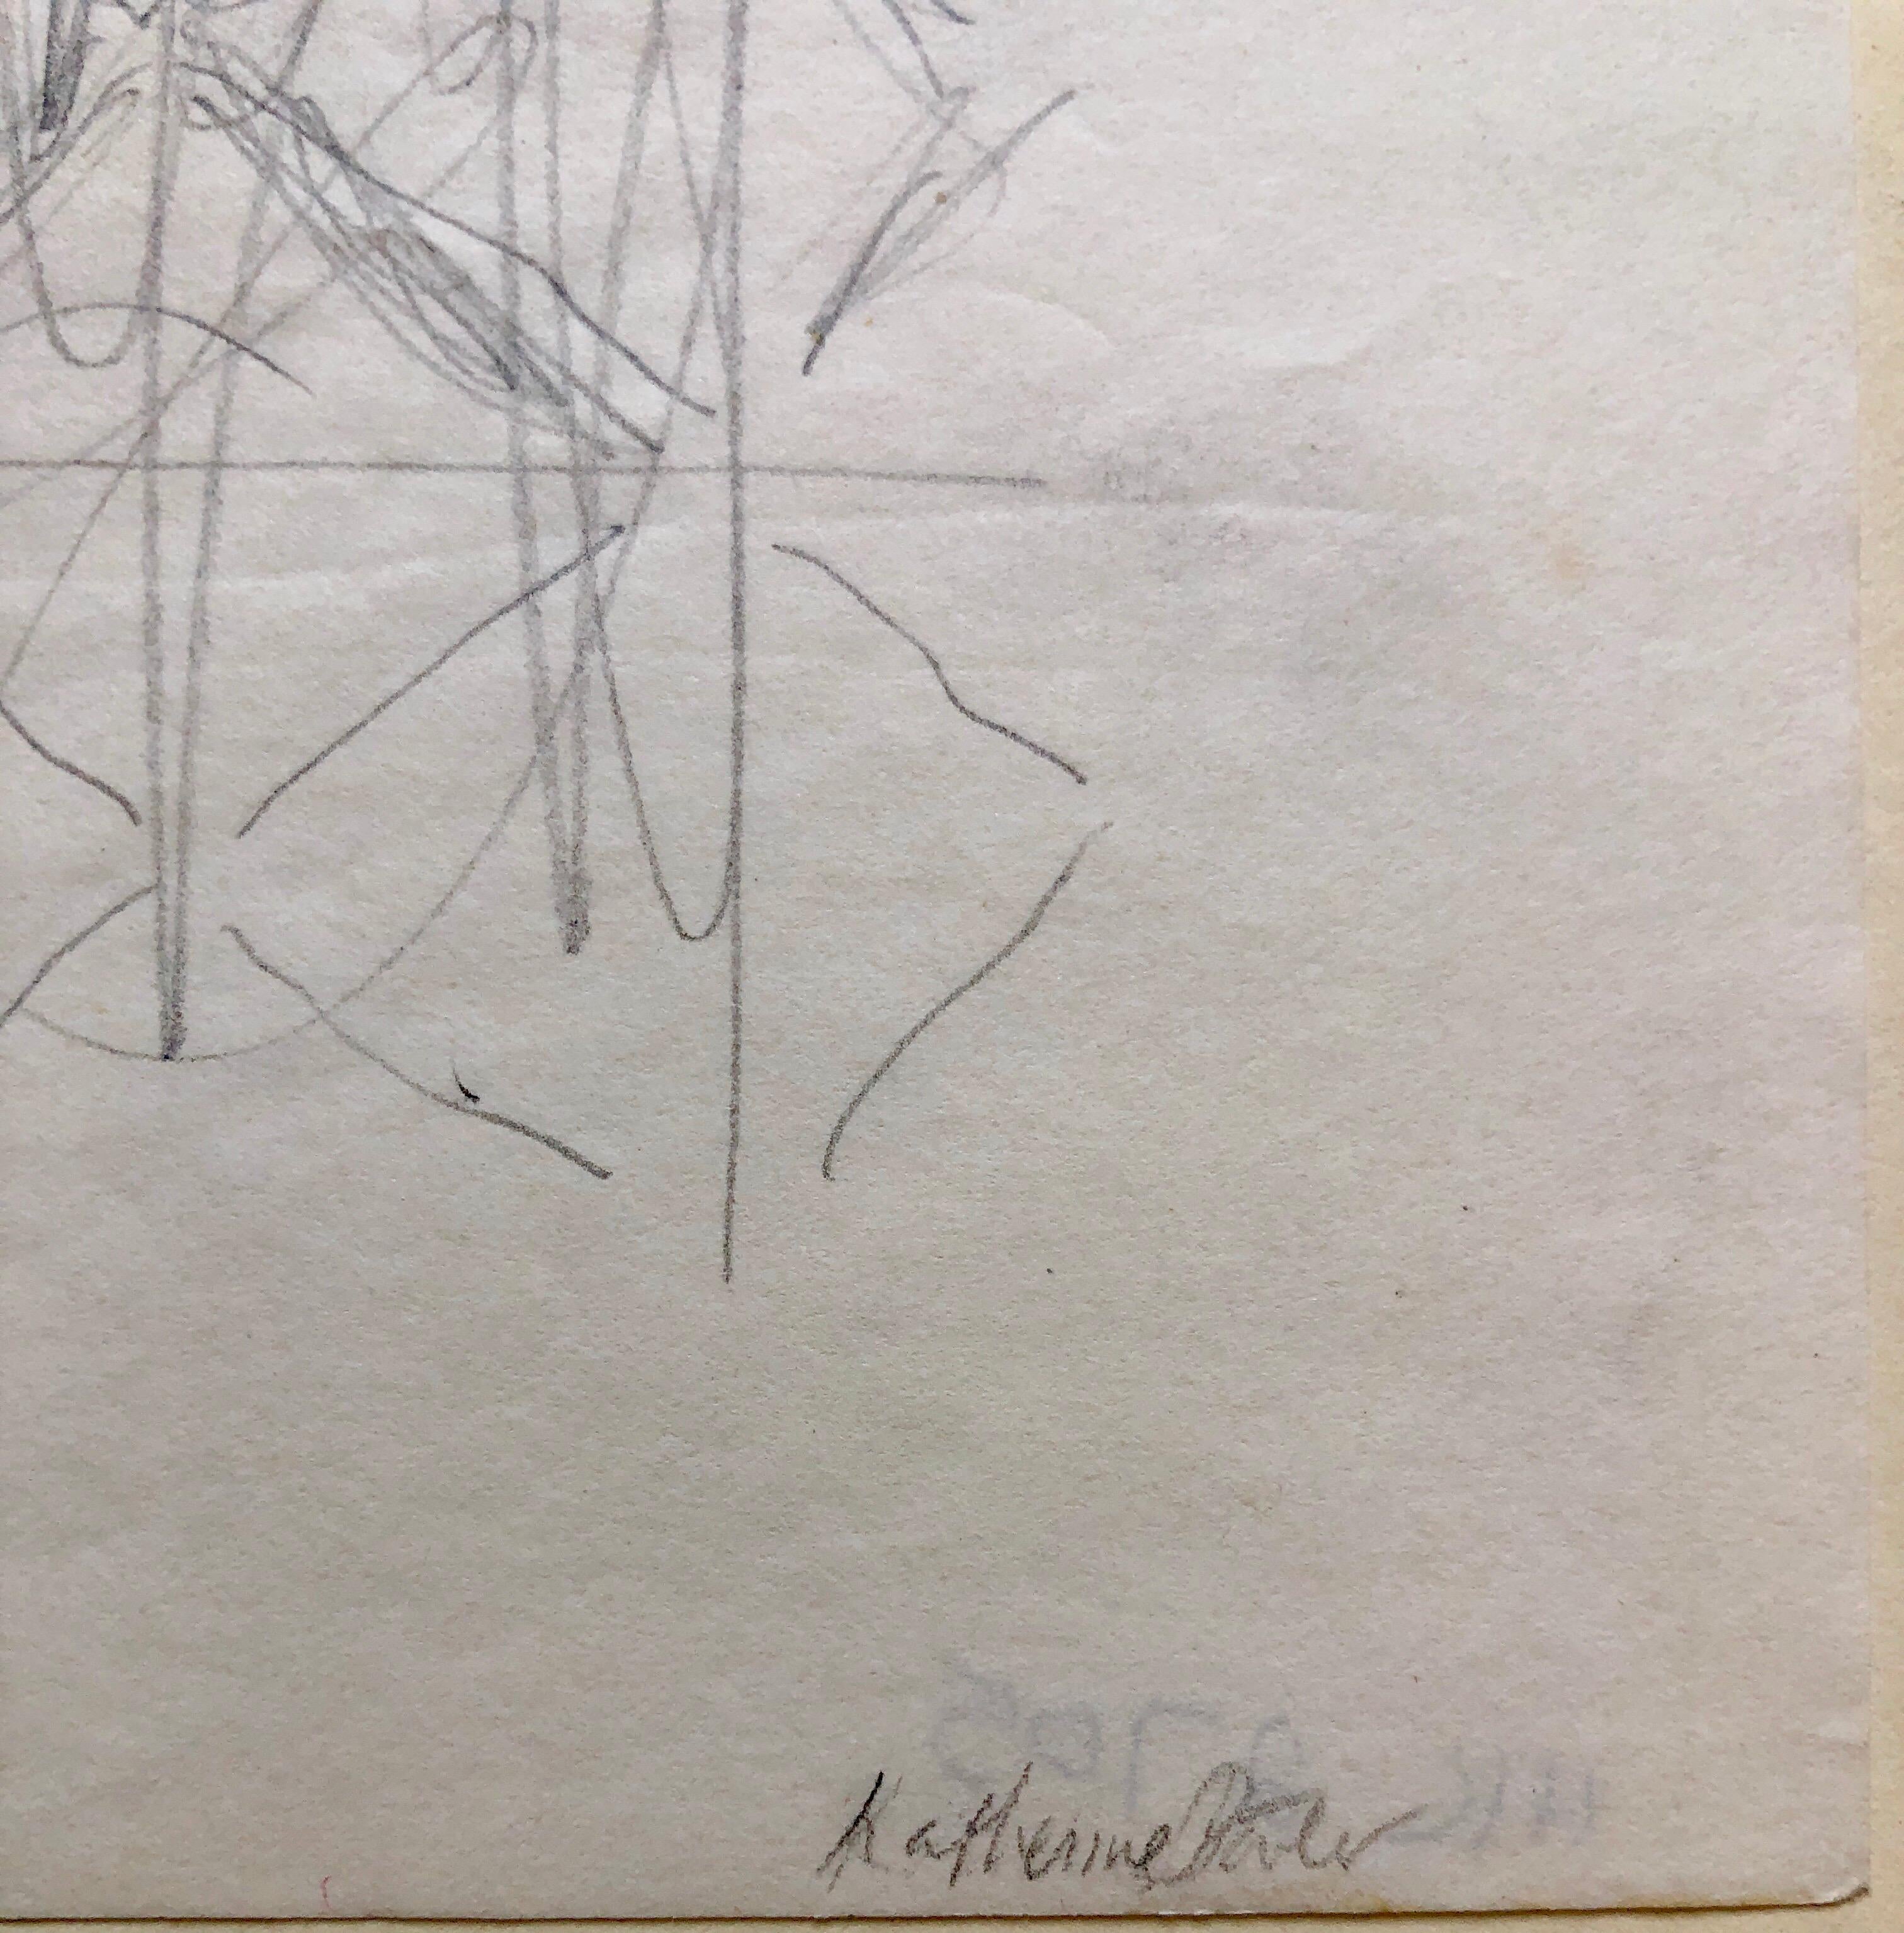 This is an origianl graphite pencil drawing. It is signed in pencil but does not appear to be dated. there is an inventory number verso.
Katherine Porter is an American artist born in Cedar Rapids, Iowa in 1941. She received her BA from Colorado